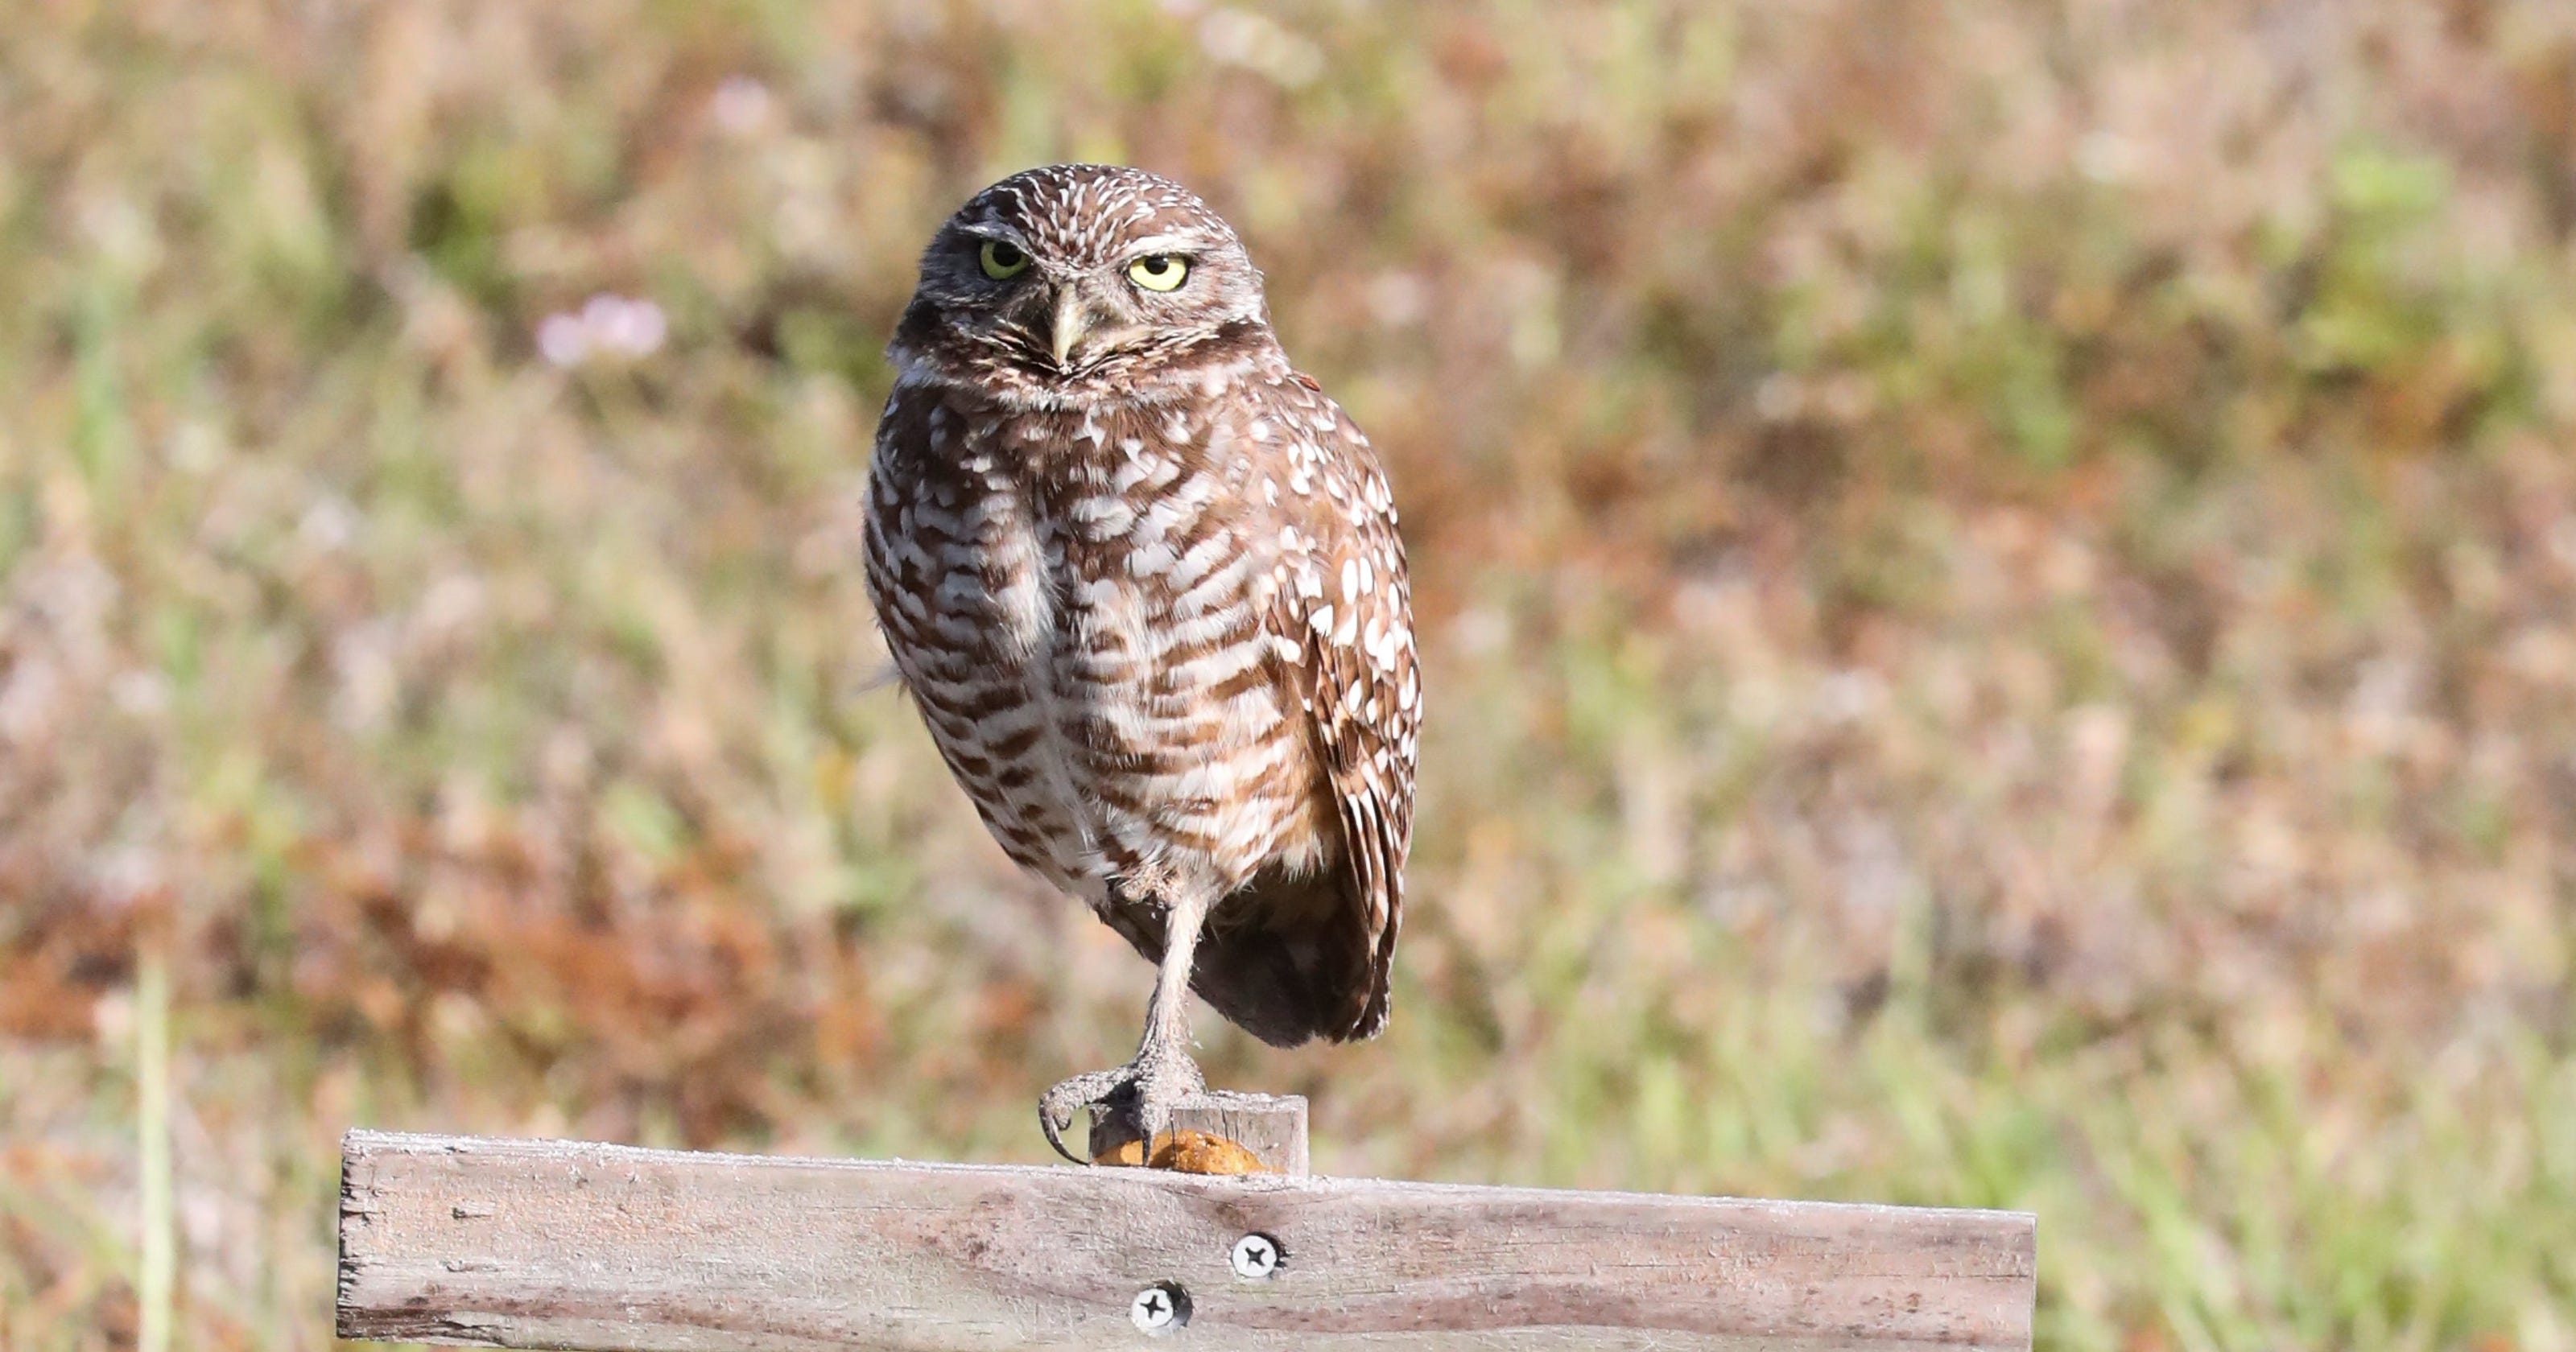 GroundOwl Day Cape Coral mascot predicts six more weeks of winter